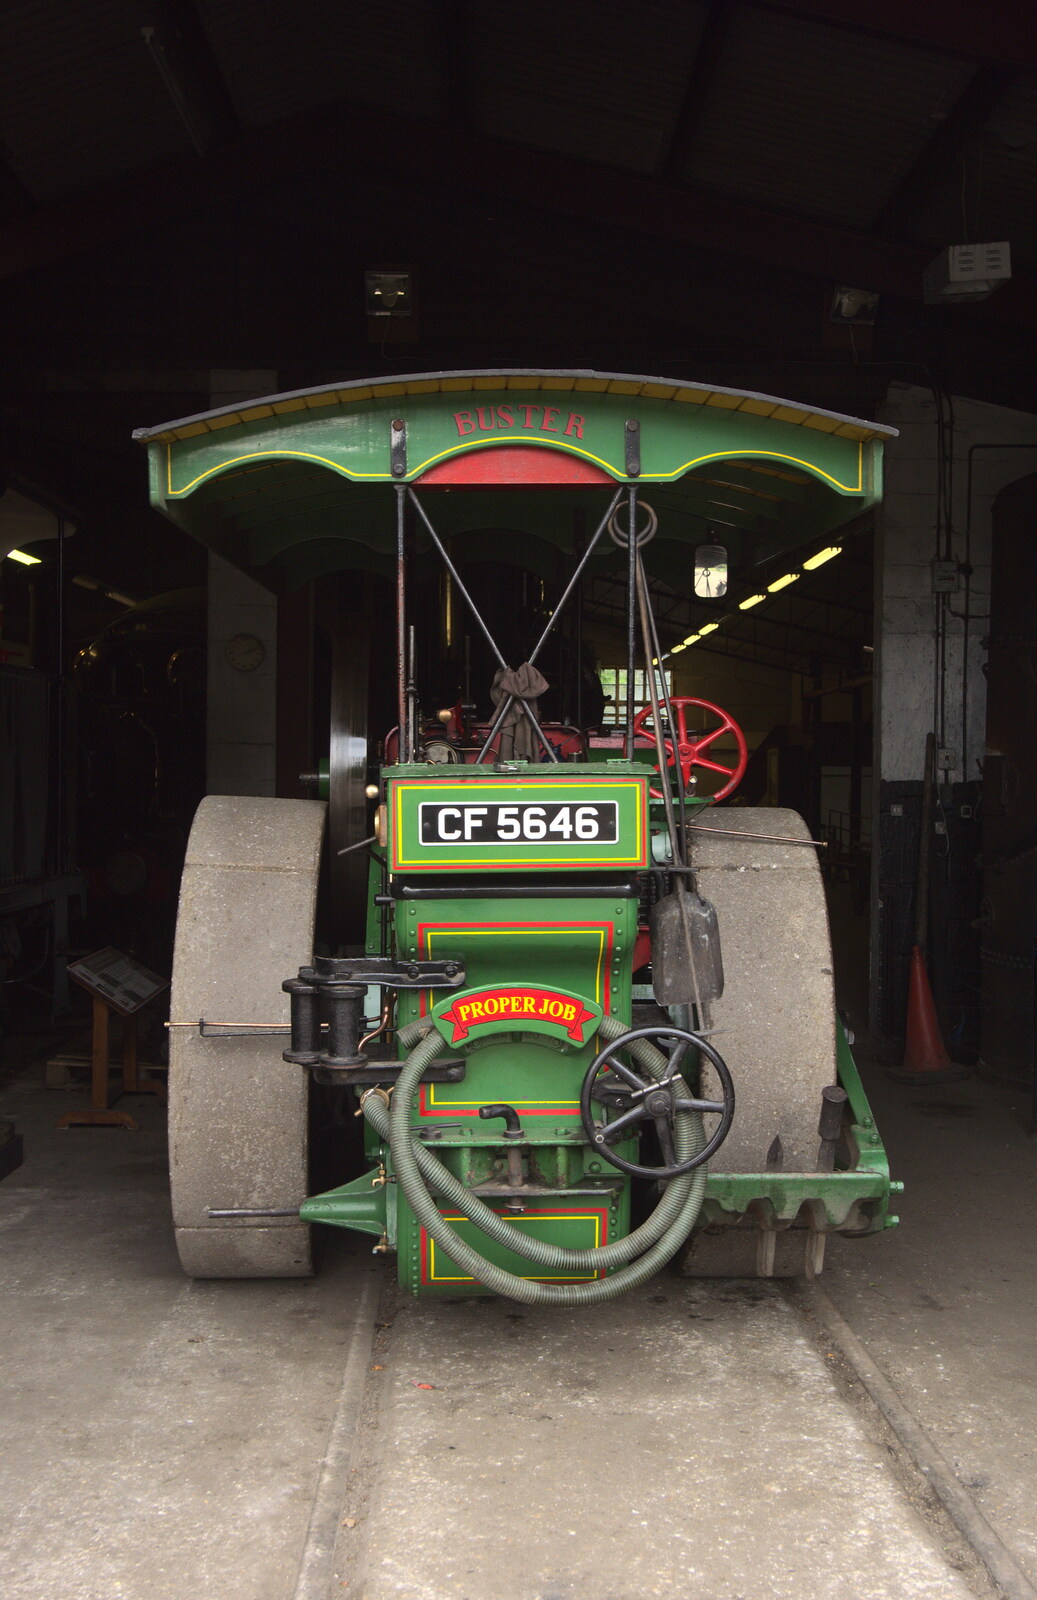 A Burrell traction engine: 'Proper Job' from A Day at Bressingham Steam and Gardens, Diss, Norfolk - 18th May 2013